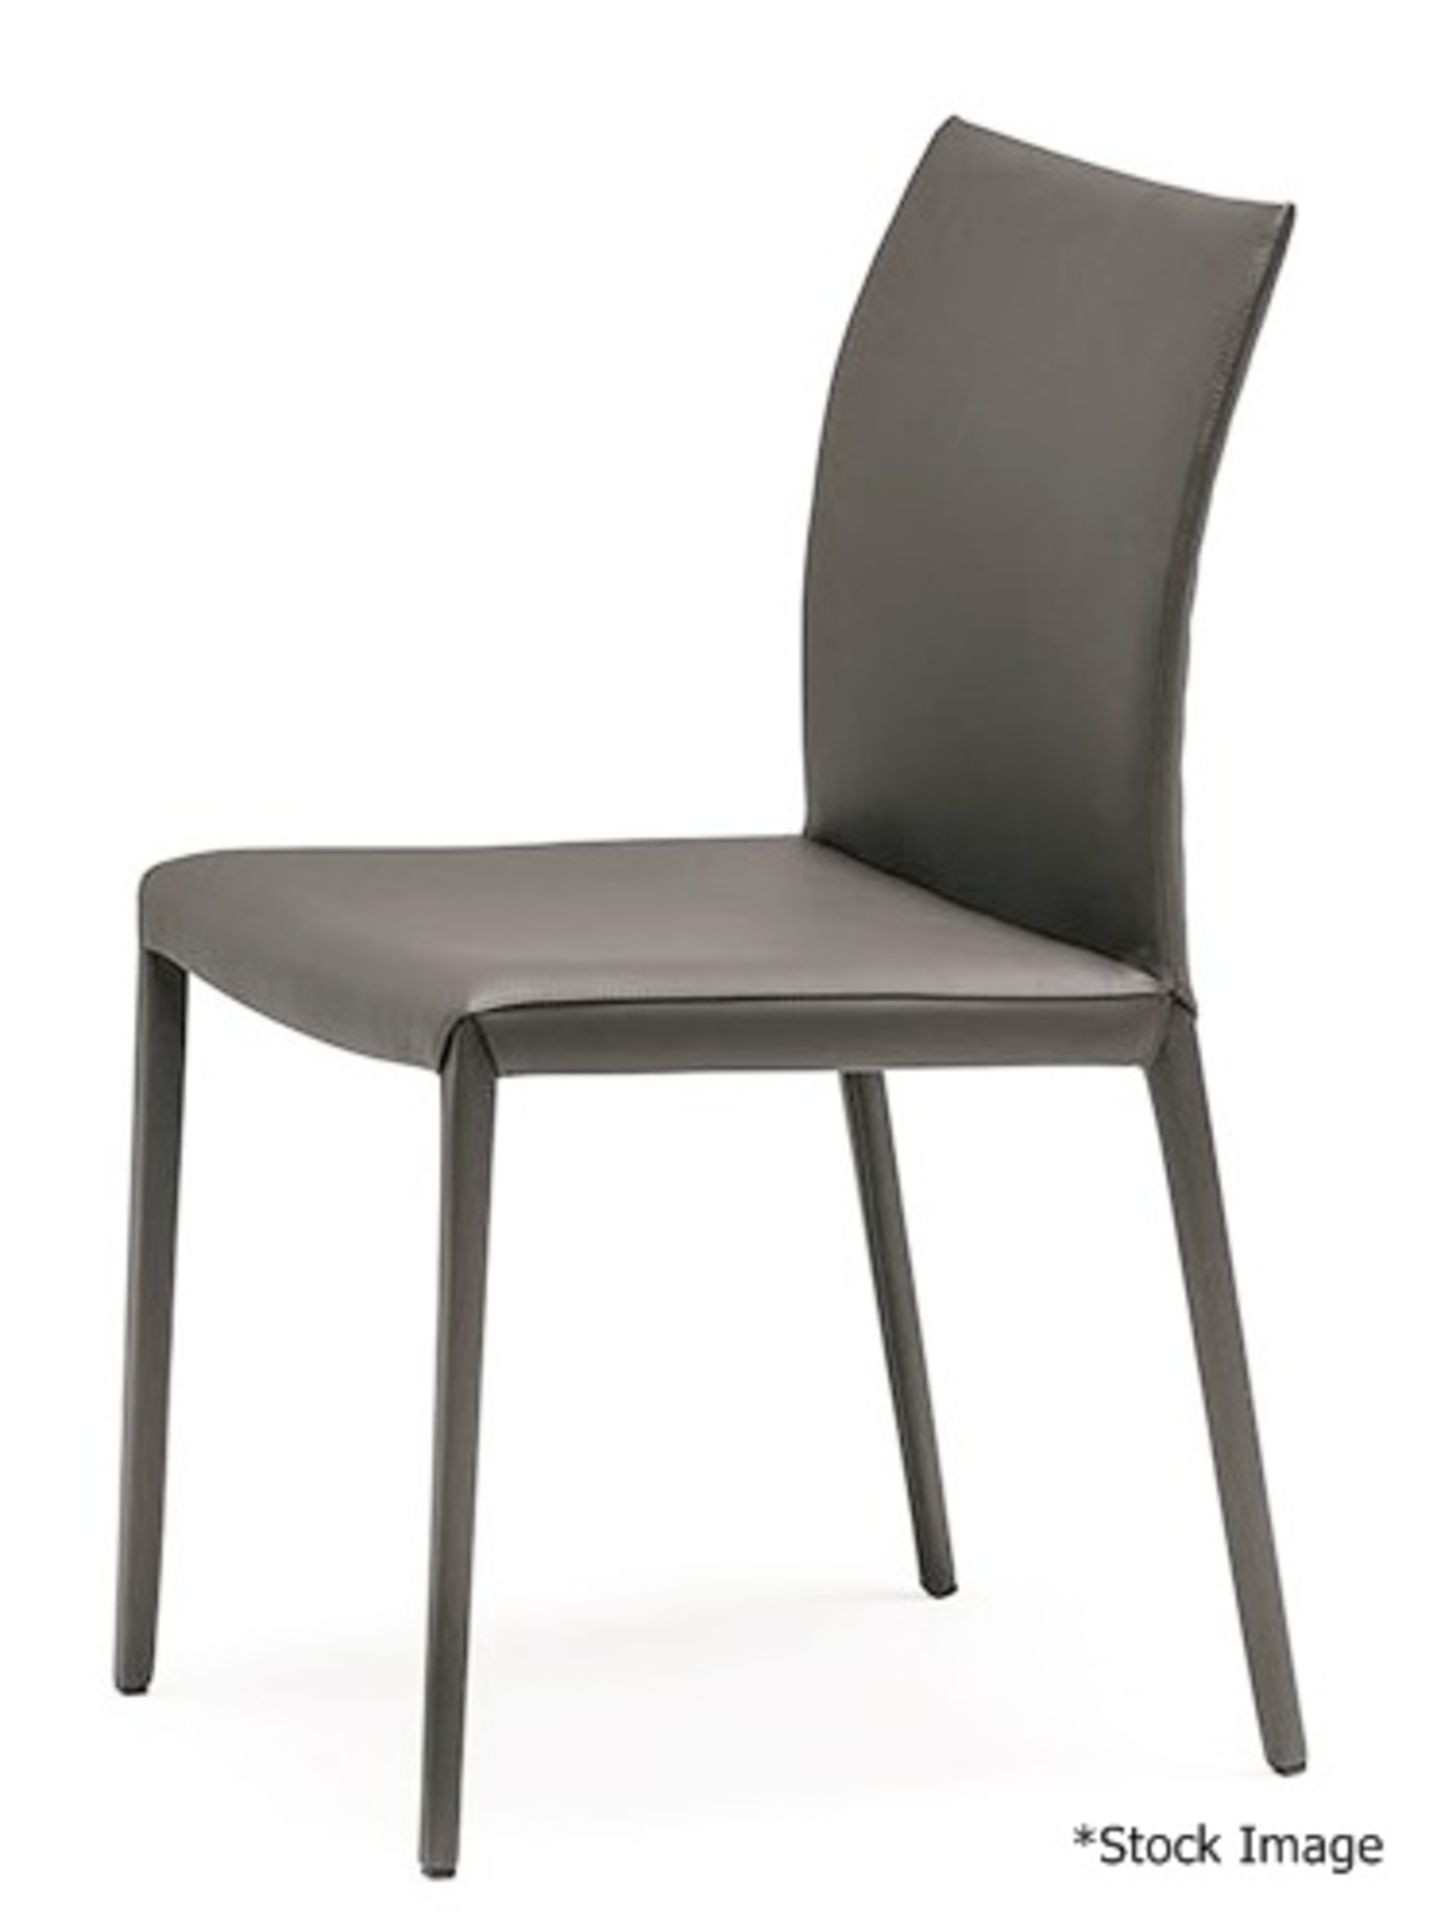 4 x CATELLAN 'Norma' Designer Italian Dining Chairs In Soft Grey Leather - Original RRP £3,840 - Image 2 of 7